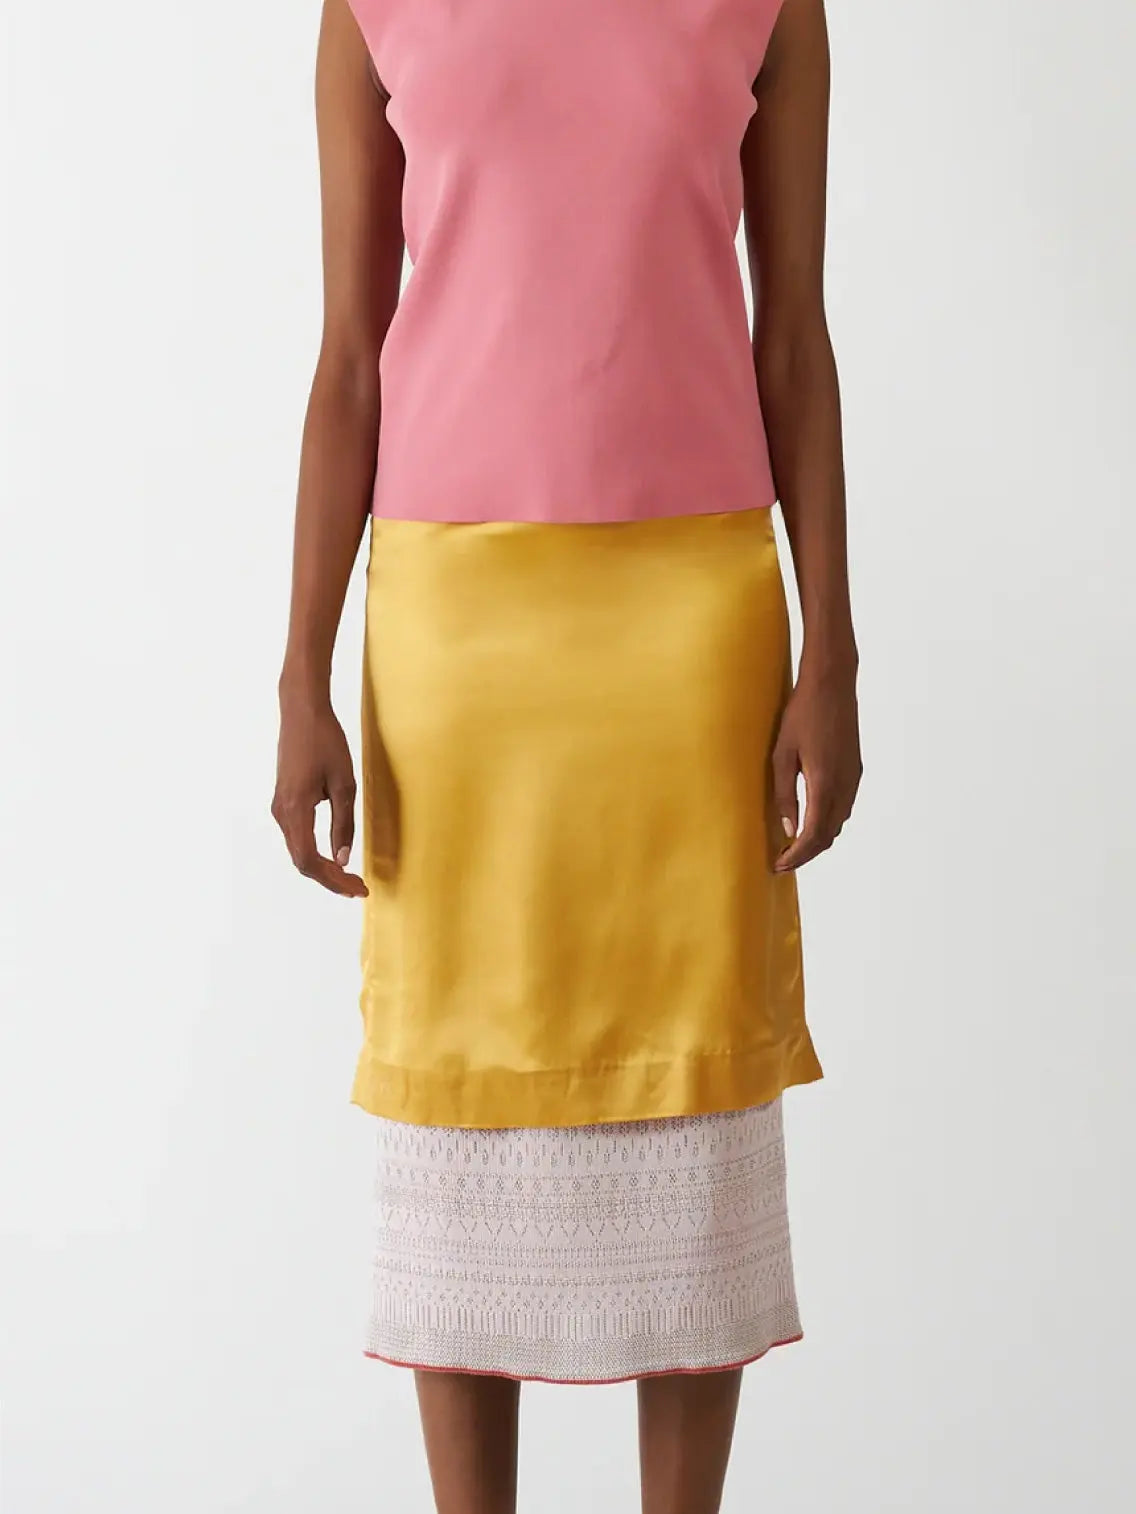 A person is wearing a sleeveless pink top paired with the Bielo Vivi Skirt Dore, which features a white crocheted lace trim at the hem. The outfit, showcasing vibrant colors, is displayed in front of a plain white background. This chic ensemble can be found at Bassalstore in Barcelona.